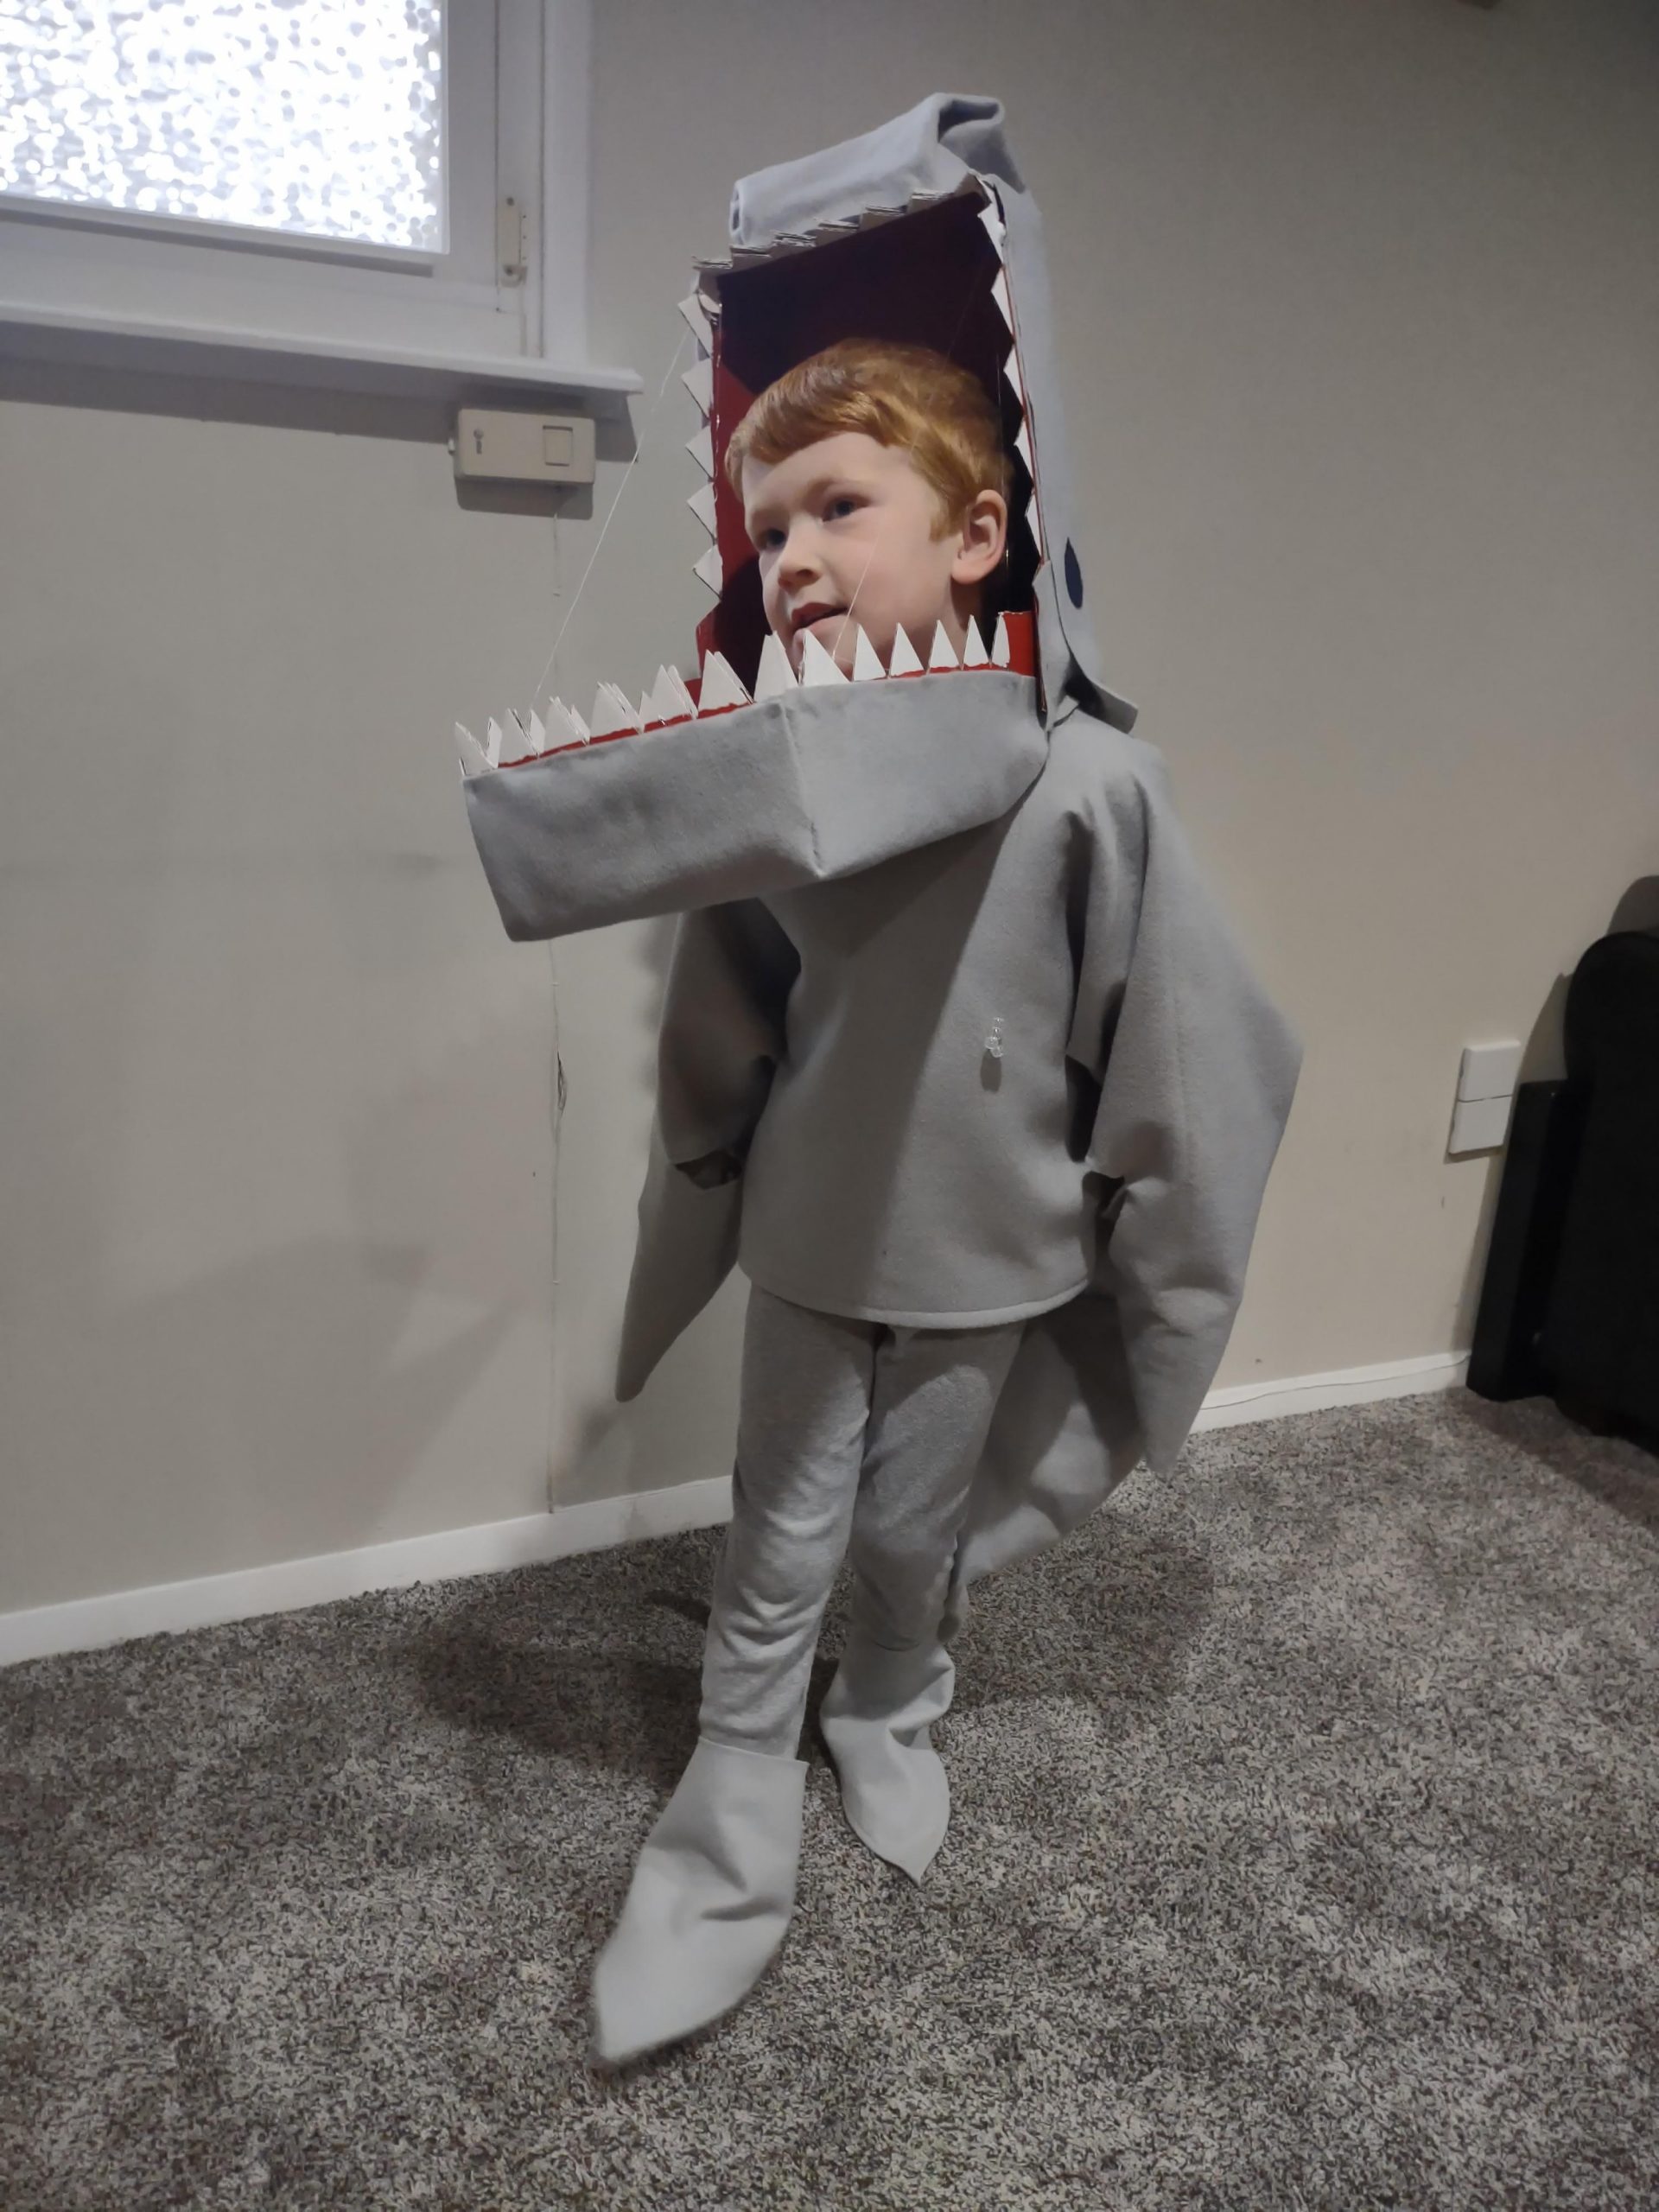 Great white shark costume with chomping mouth!